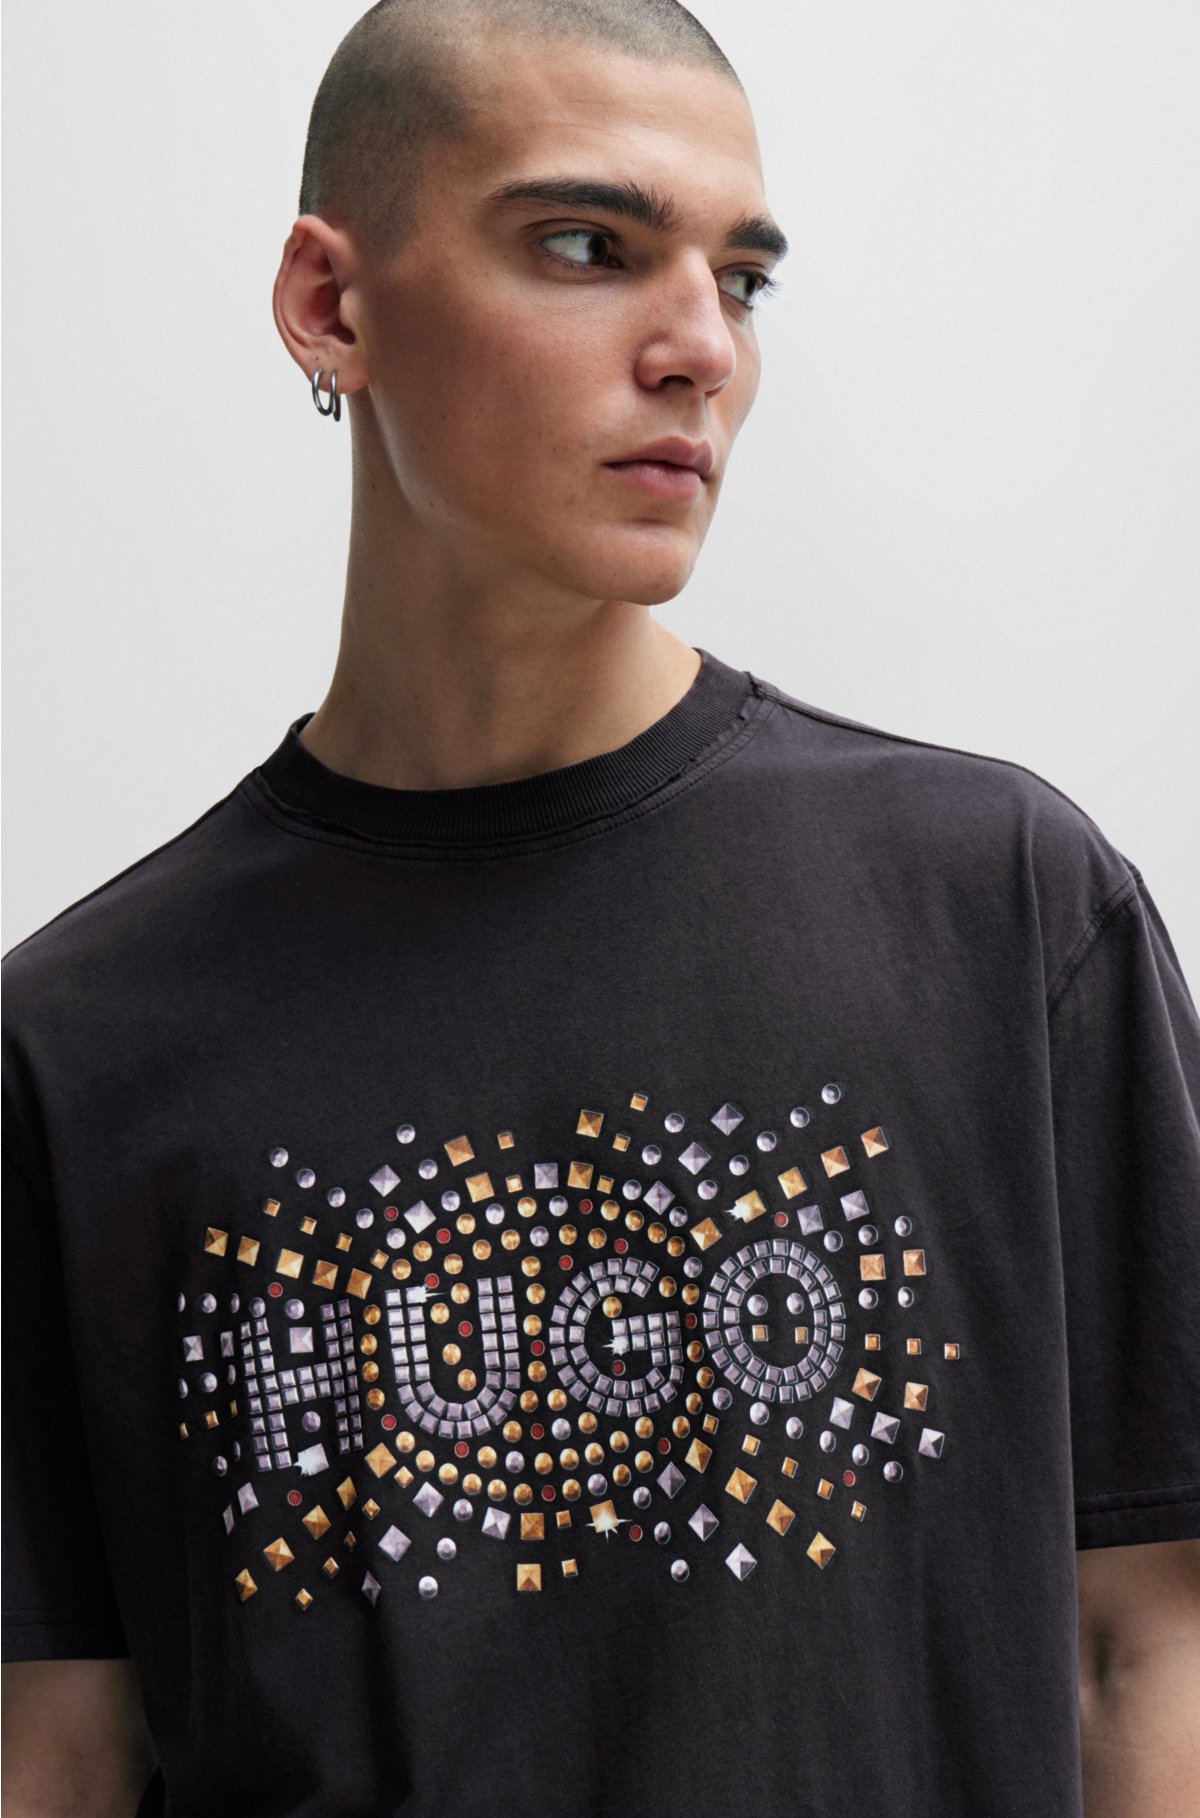 Cotton-jersey T-shirt with stud-effect artwork, Black